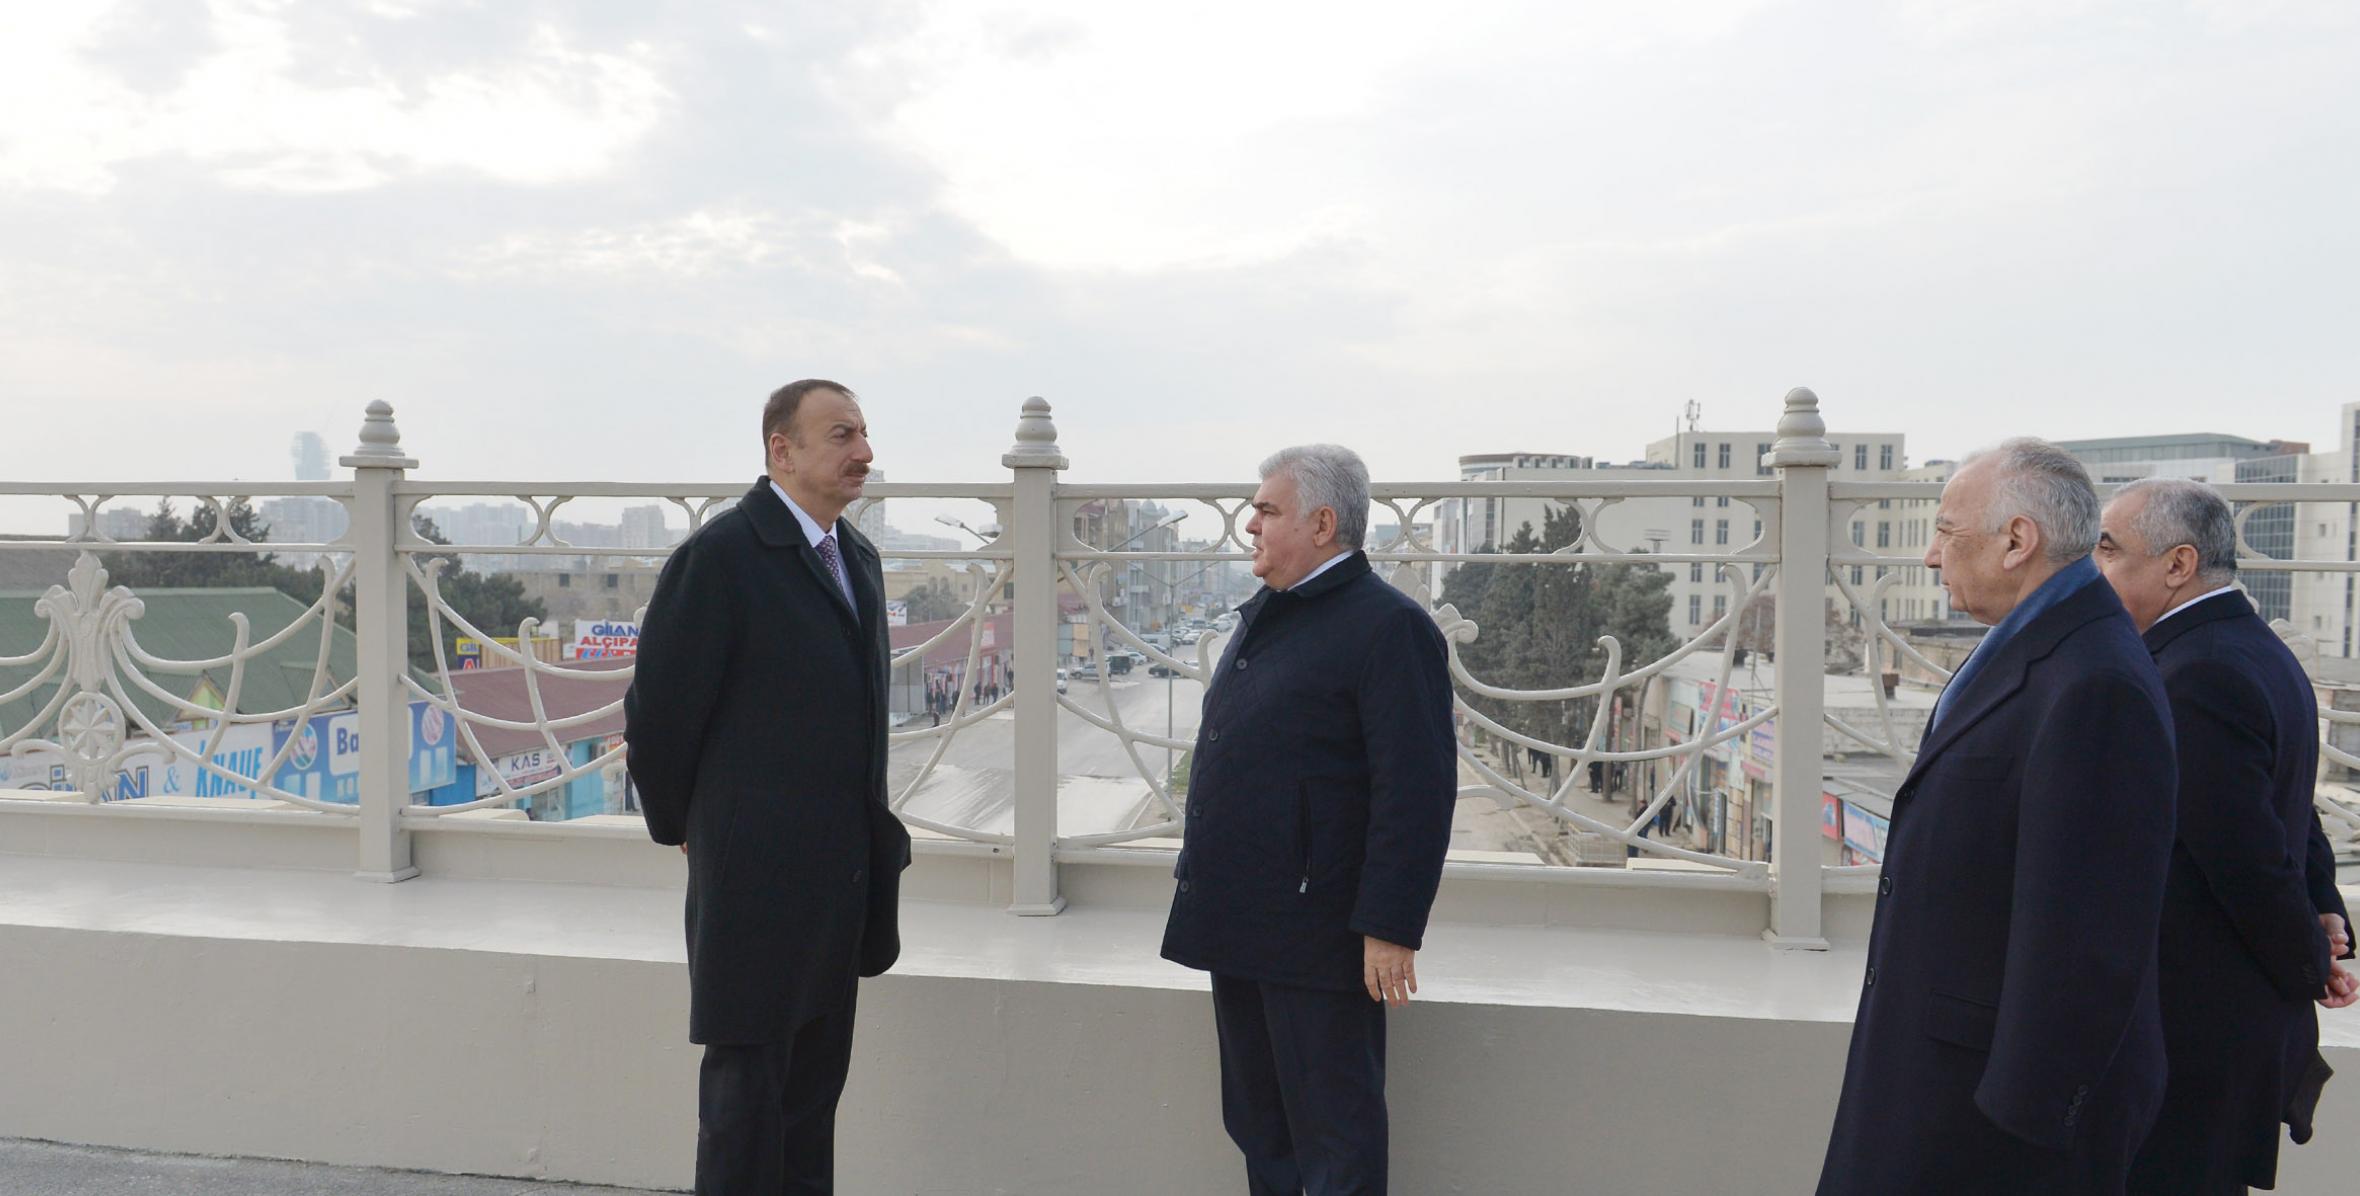 Ilham Aliyev reviewed progress of construction of a number of road junctions and overpasses in Baku